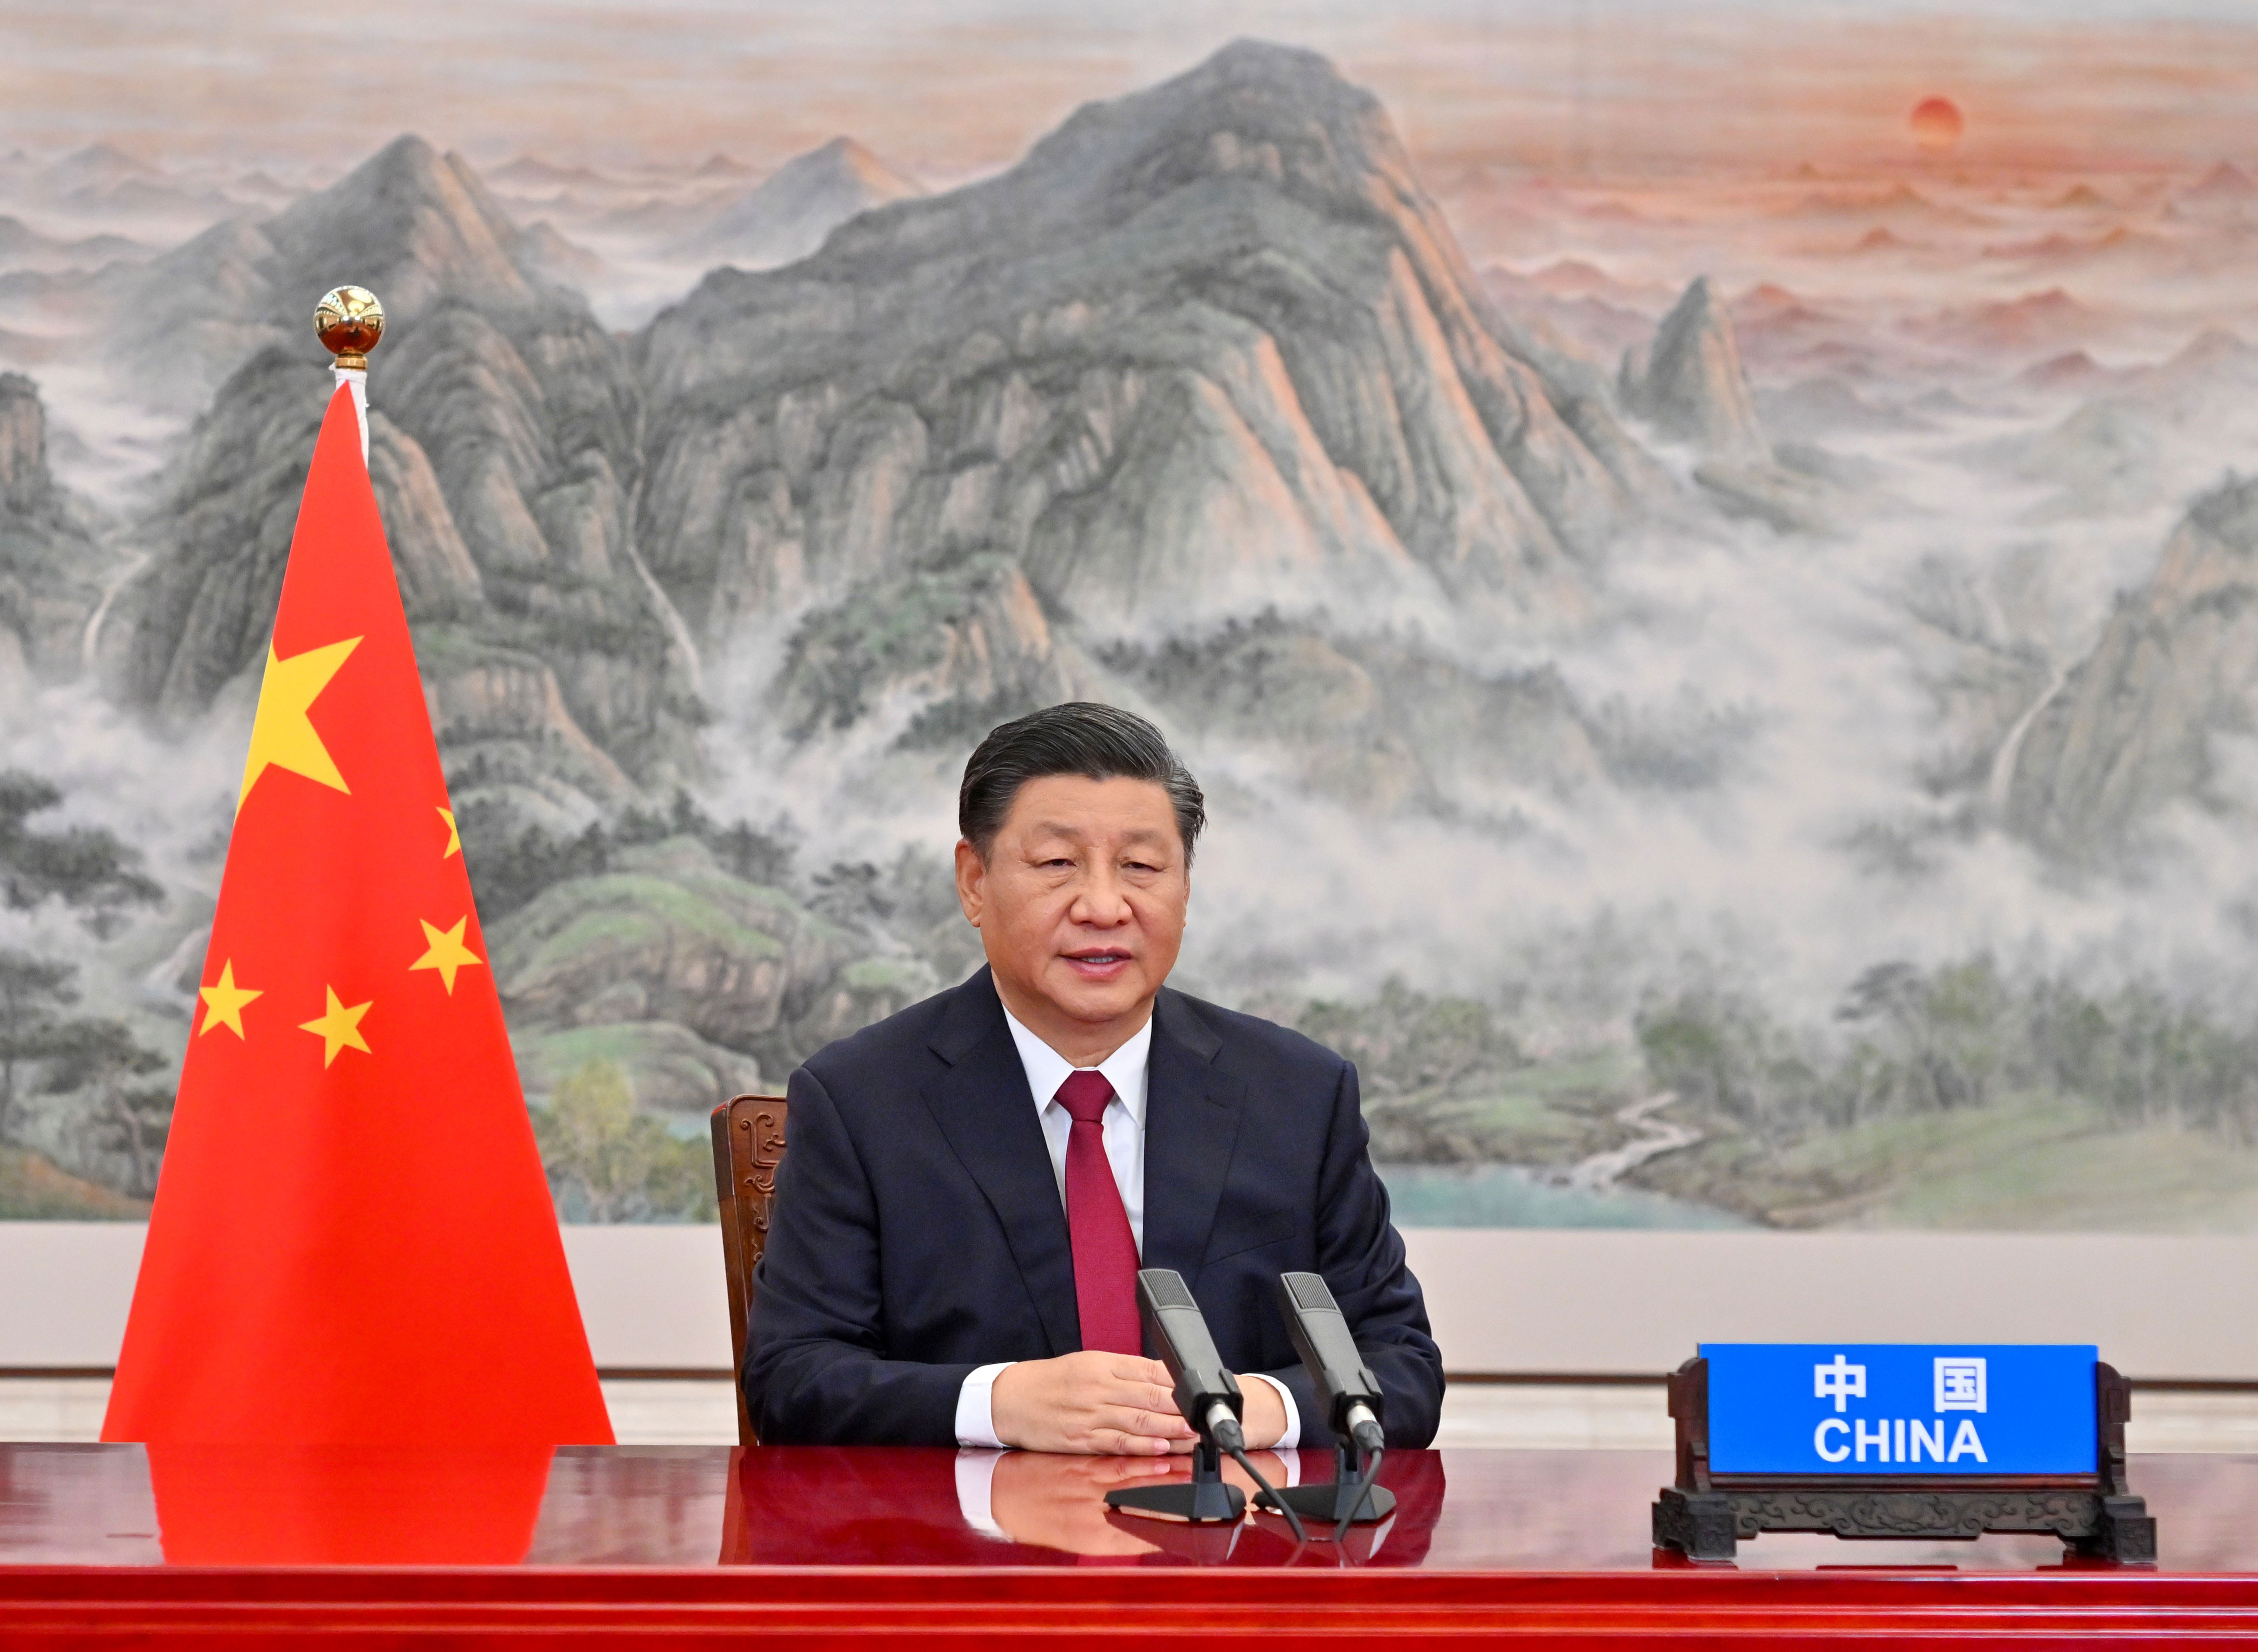 Chinese President Xi Jinping addresses a session of the G20 summit via video in Beijing on October 30.